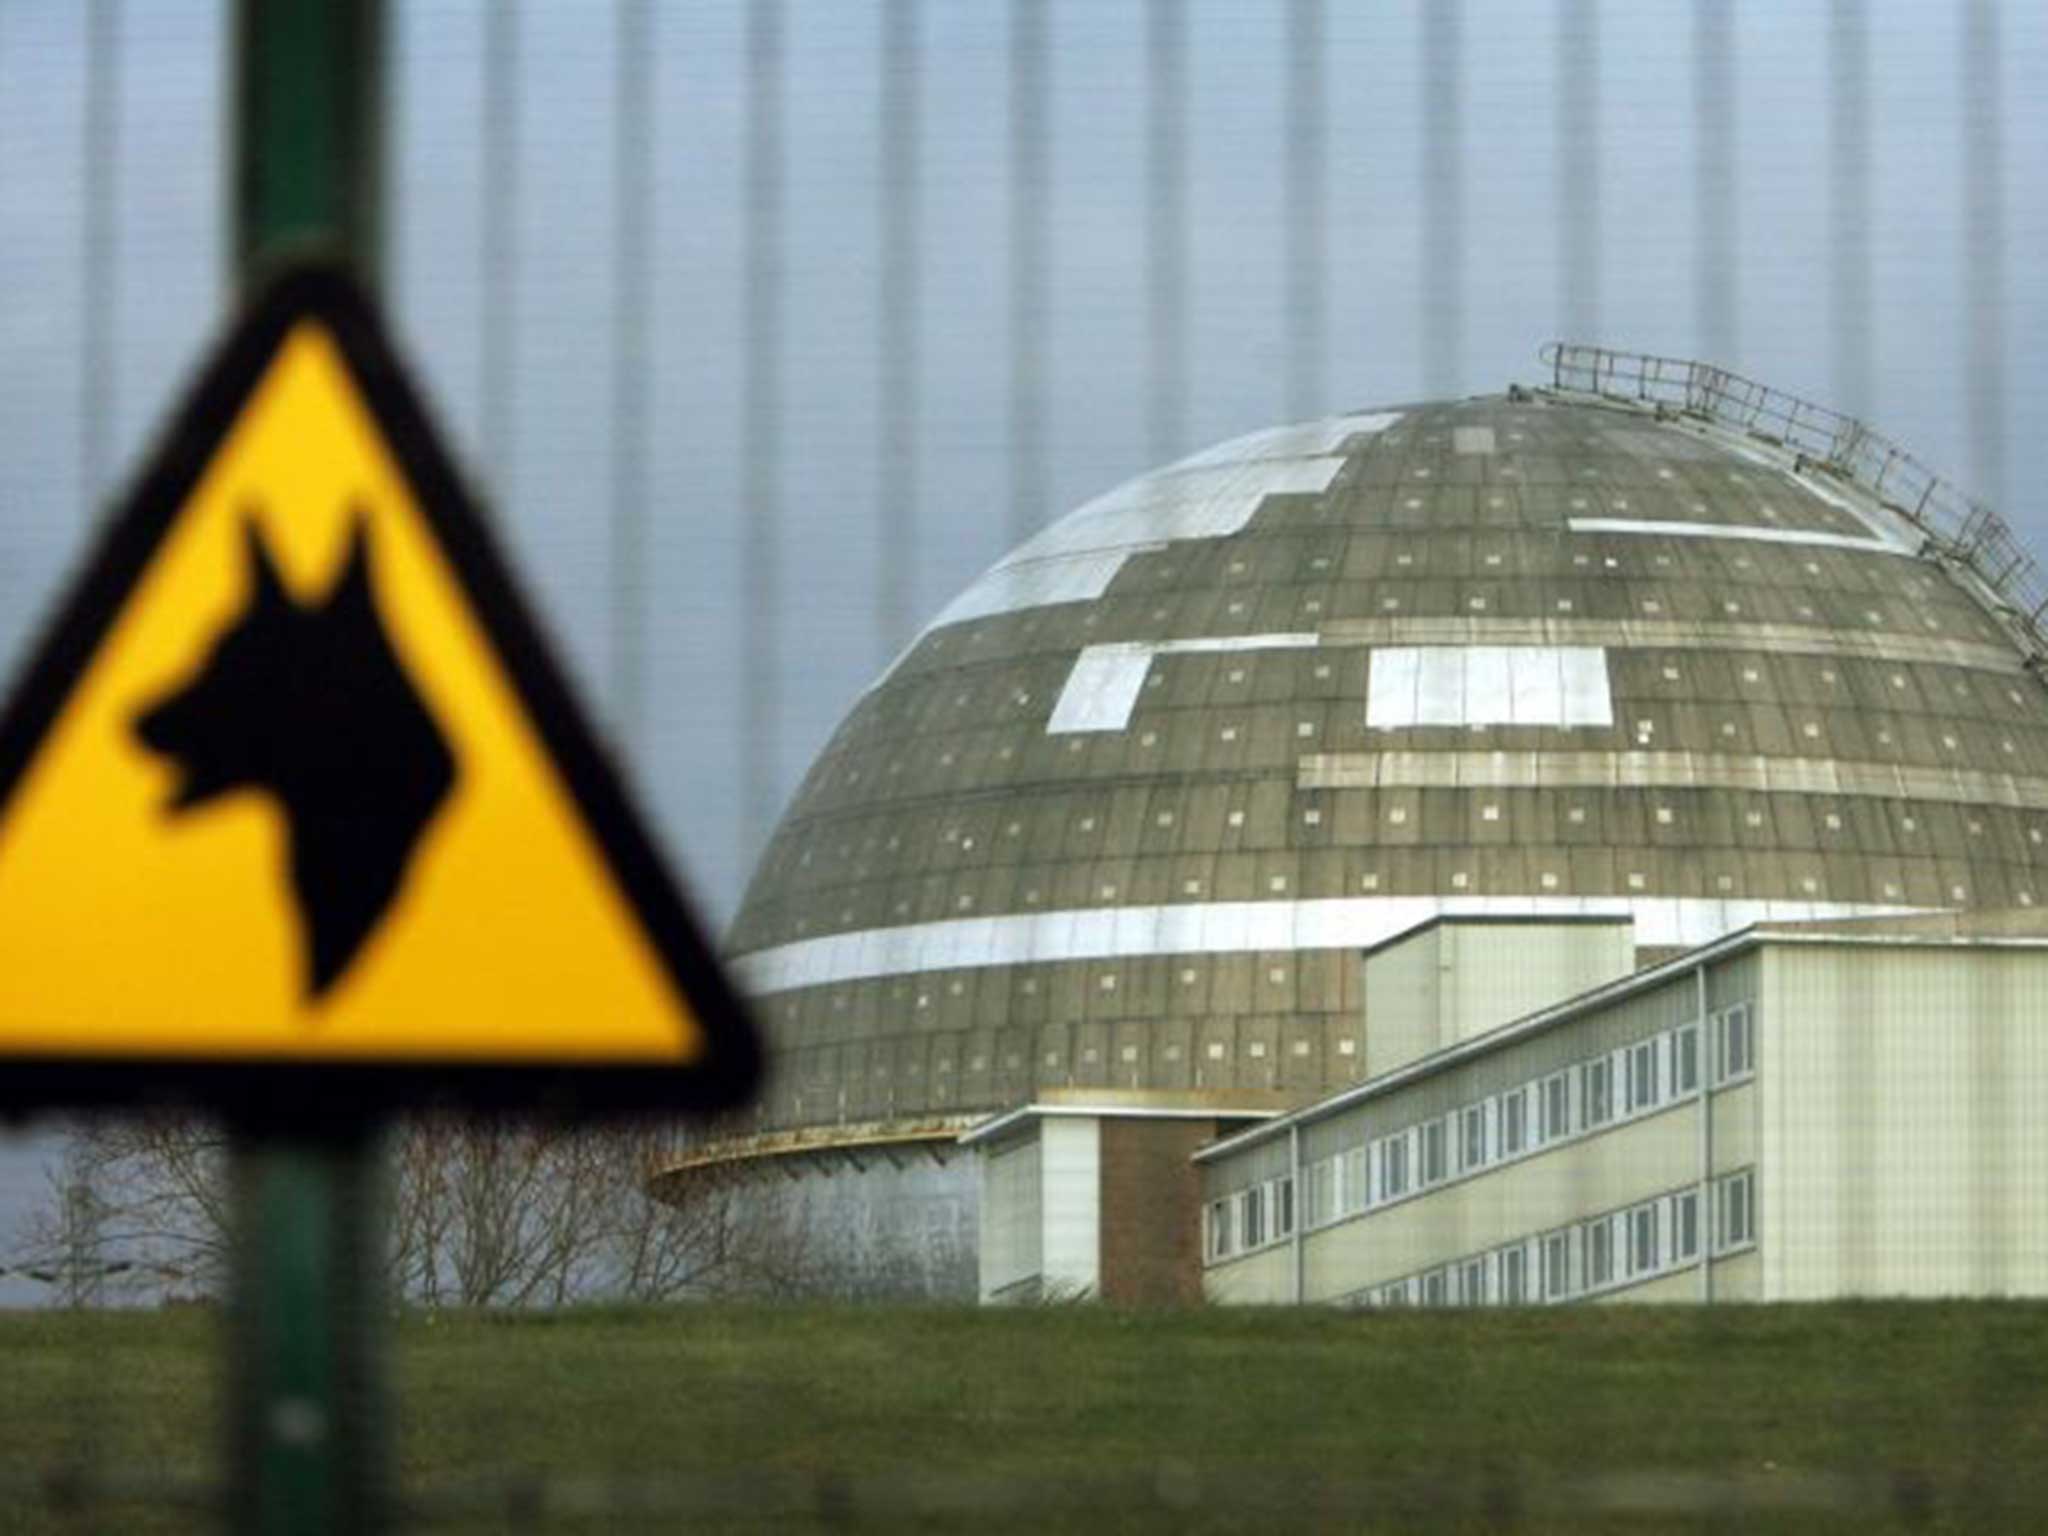 Sellafield is one of the UK’s most complicated decontamination sites